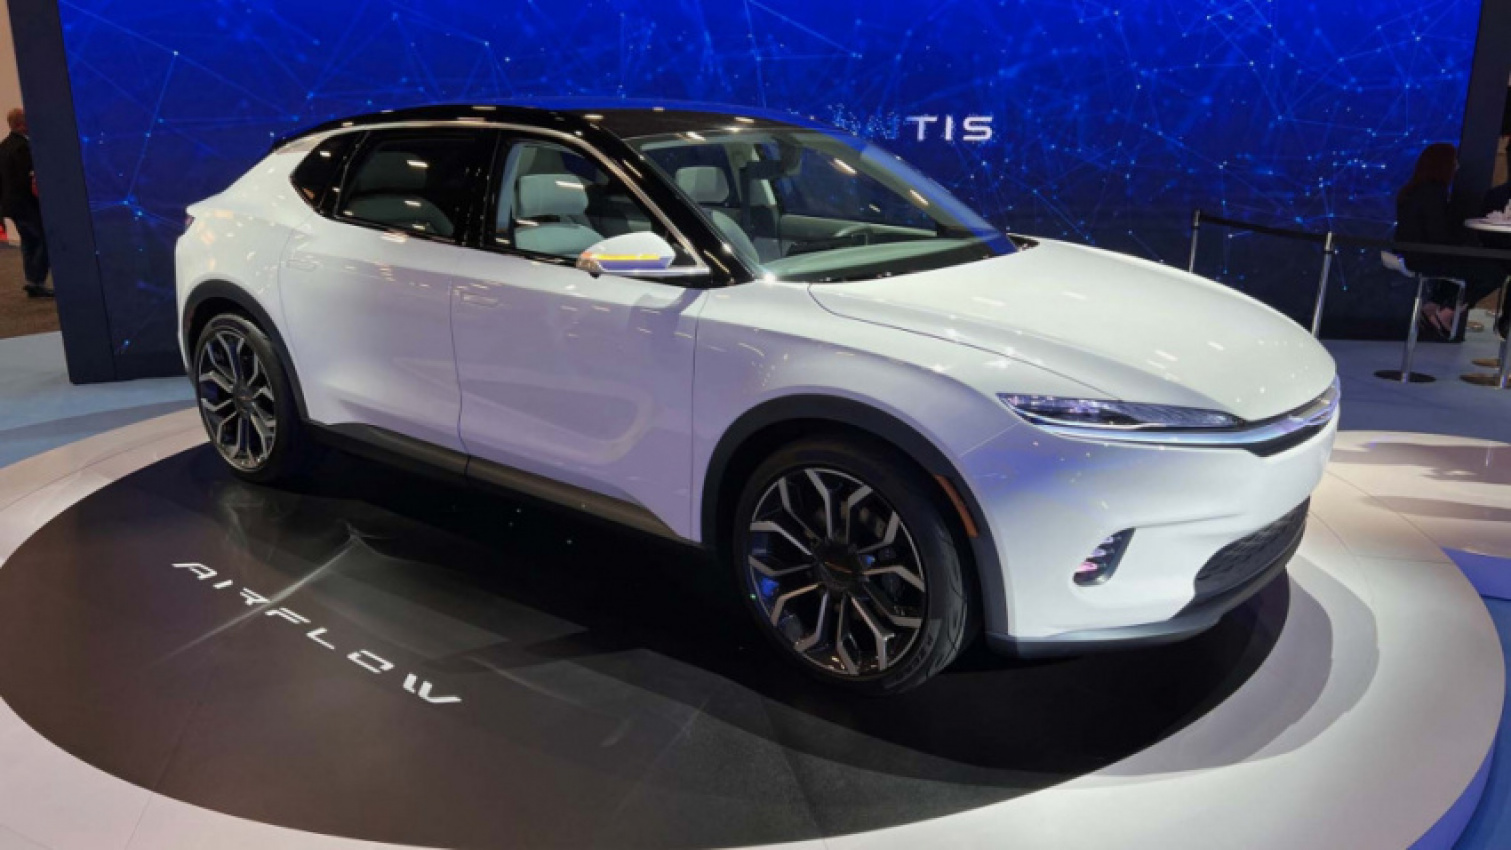 autos, cars, chrysler, auto shows, chrysler news, concept cars, electric cars, new york auto show, suvs, chrysler rolls out updated airflow ev concept at 2022 new york auto show